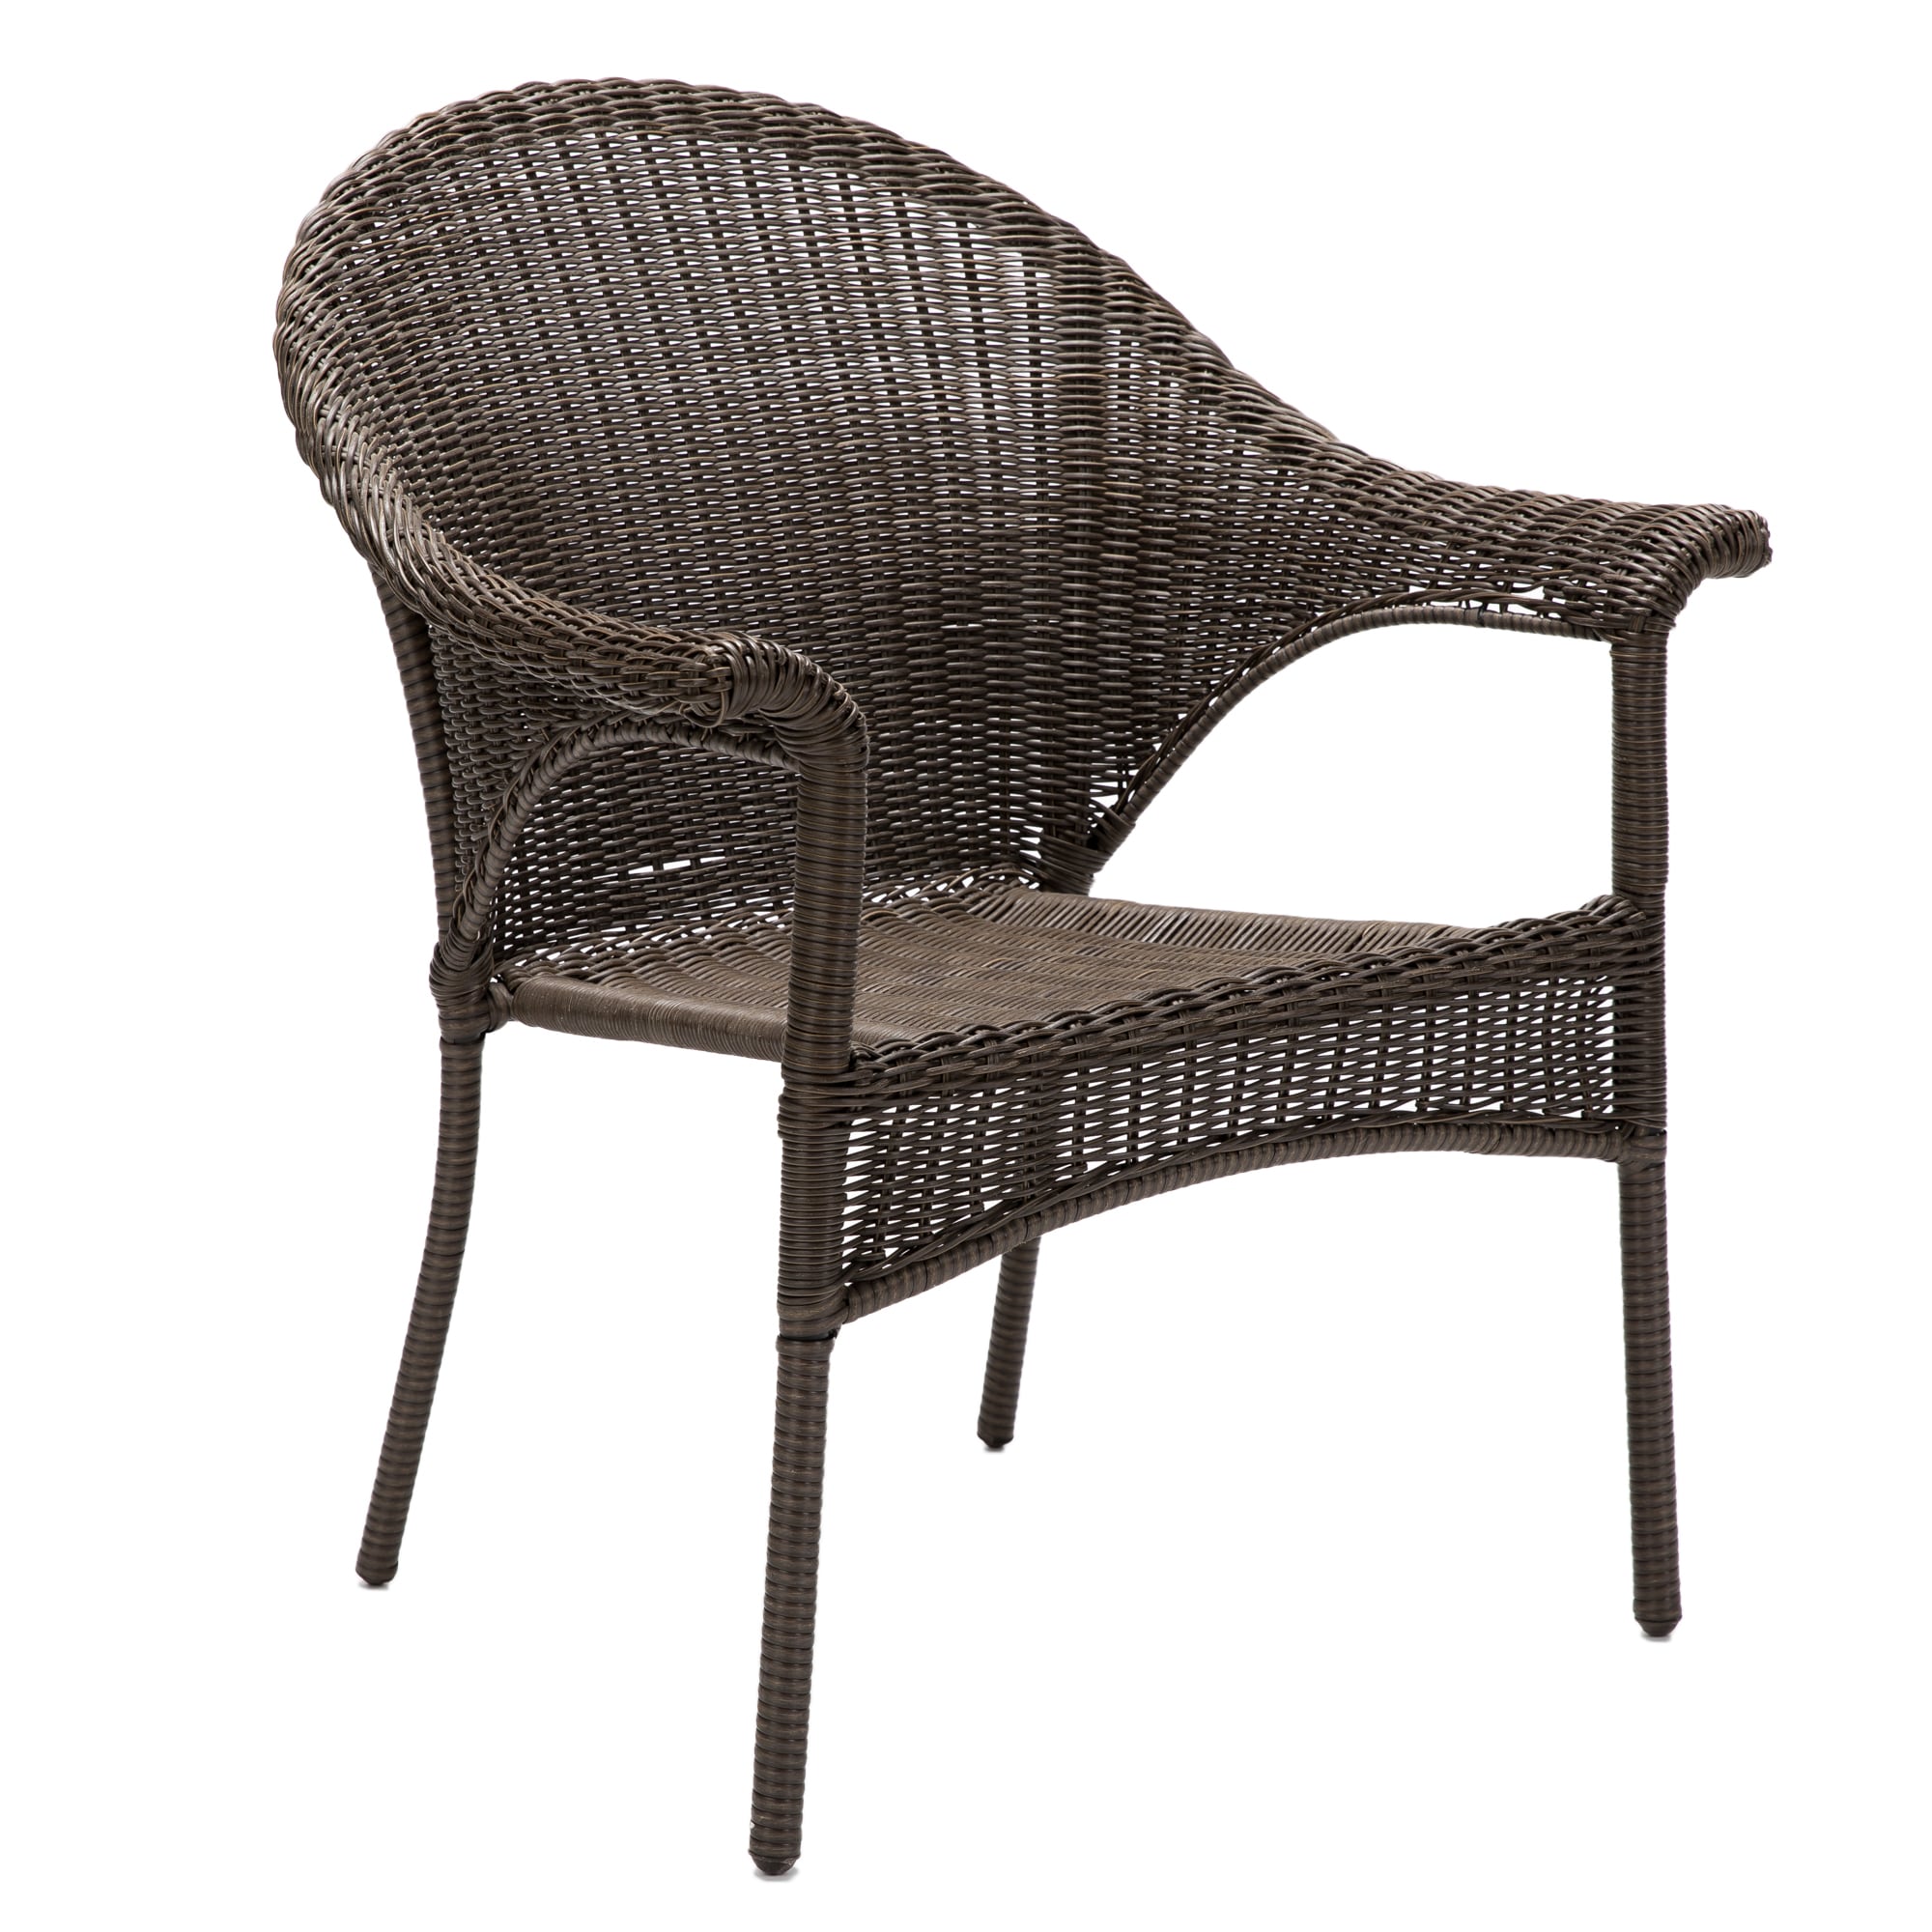 Valleydale Wicker Stackable Brown Steel Frame Stationary Conversation Chair(s) with Woven Seat | - Style Selections LG-8203-DC